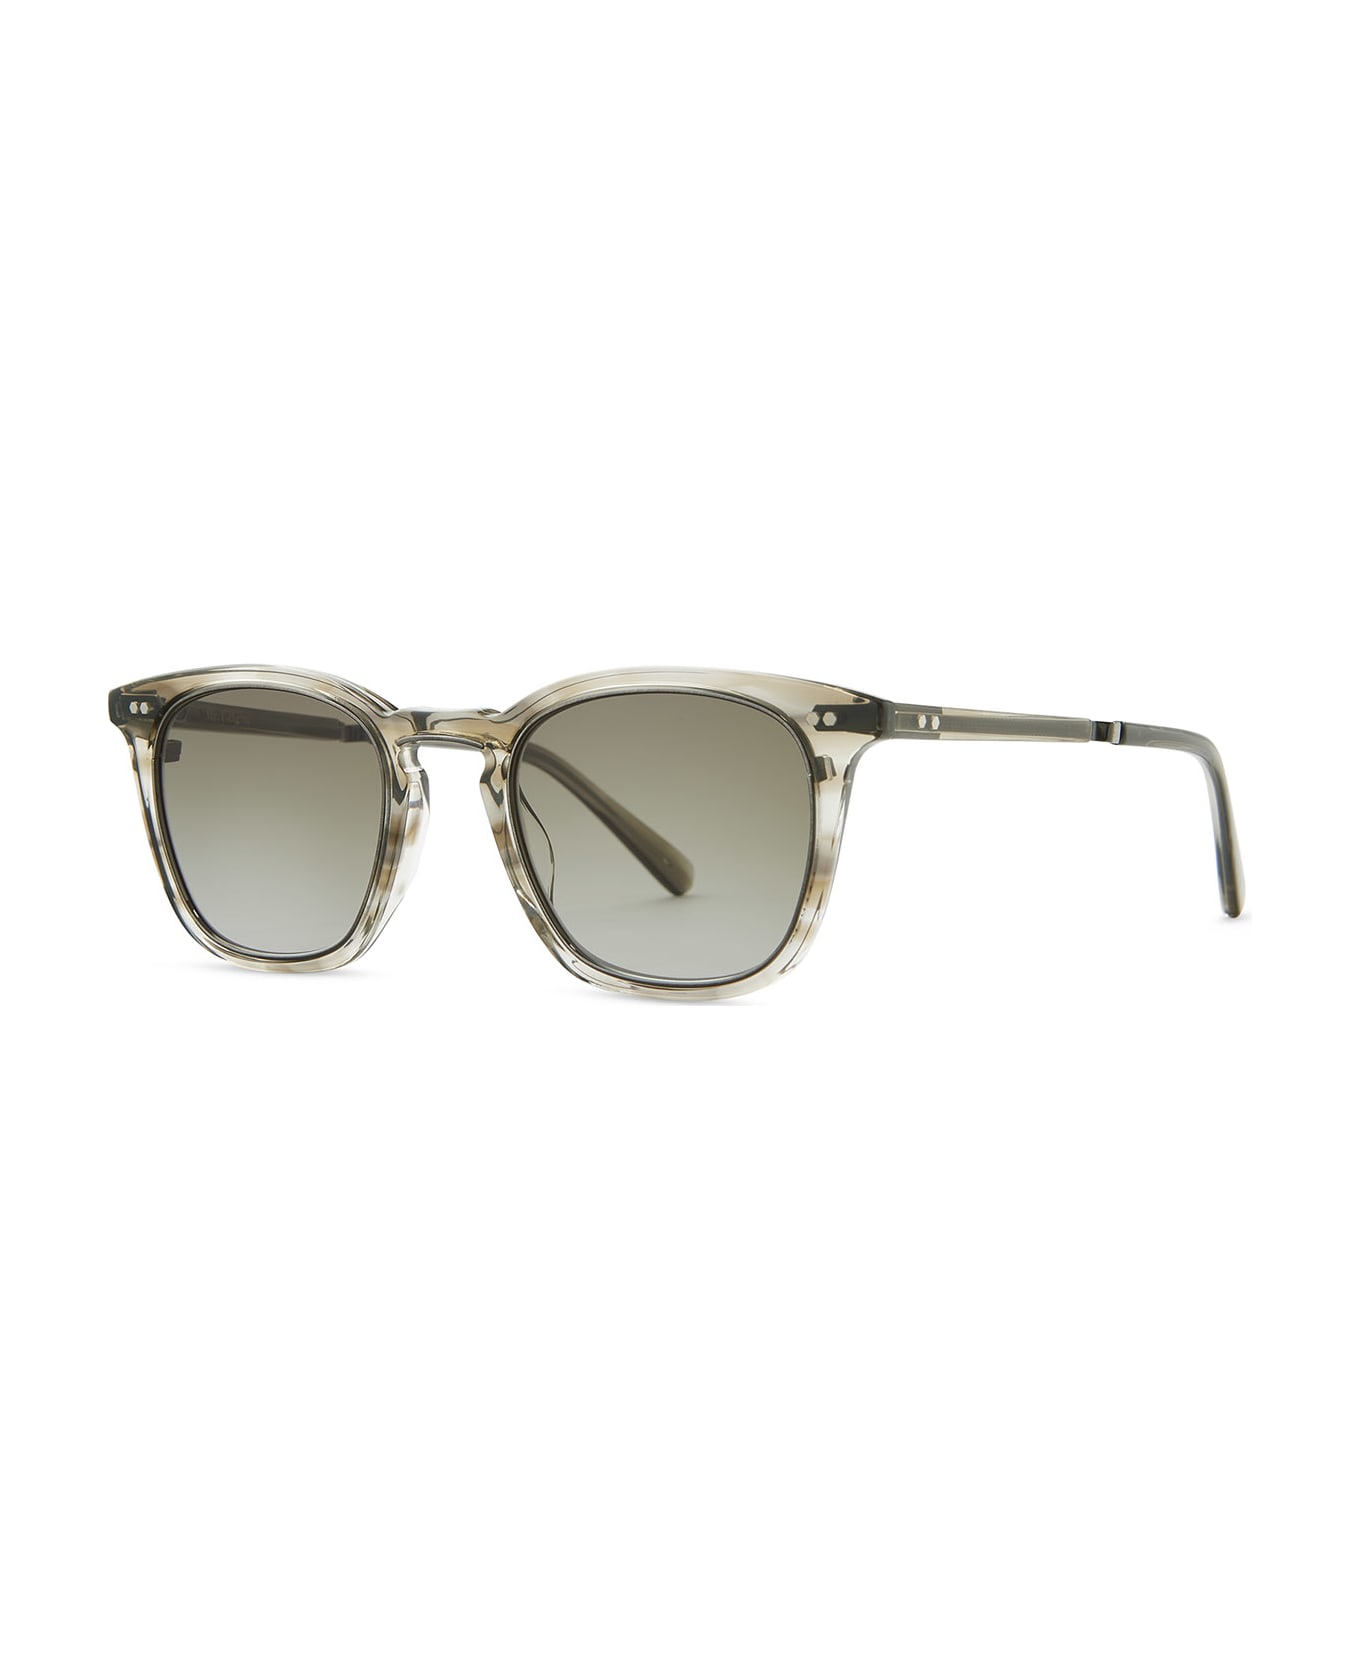 Mr. Leight Getty Ii S Celestial Grey-pewter Sunglasses -  Celestial Grey-Pewter サングラス